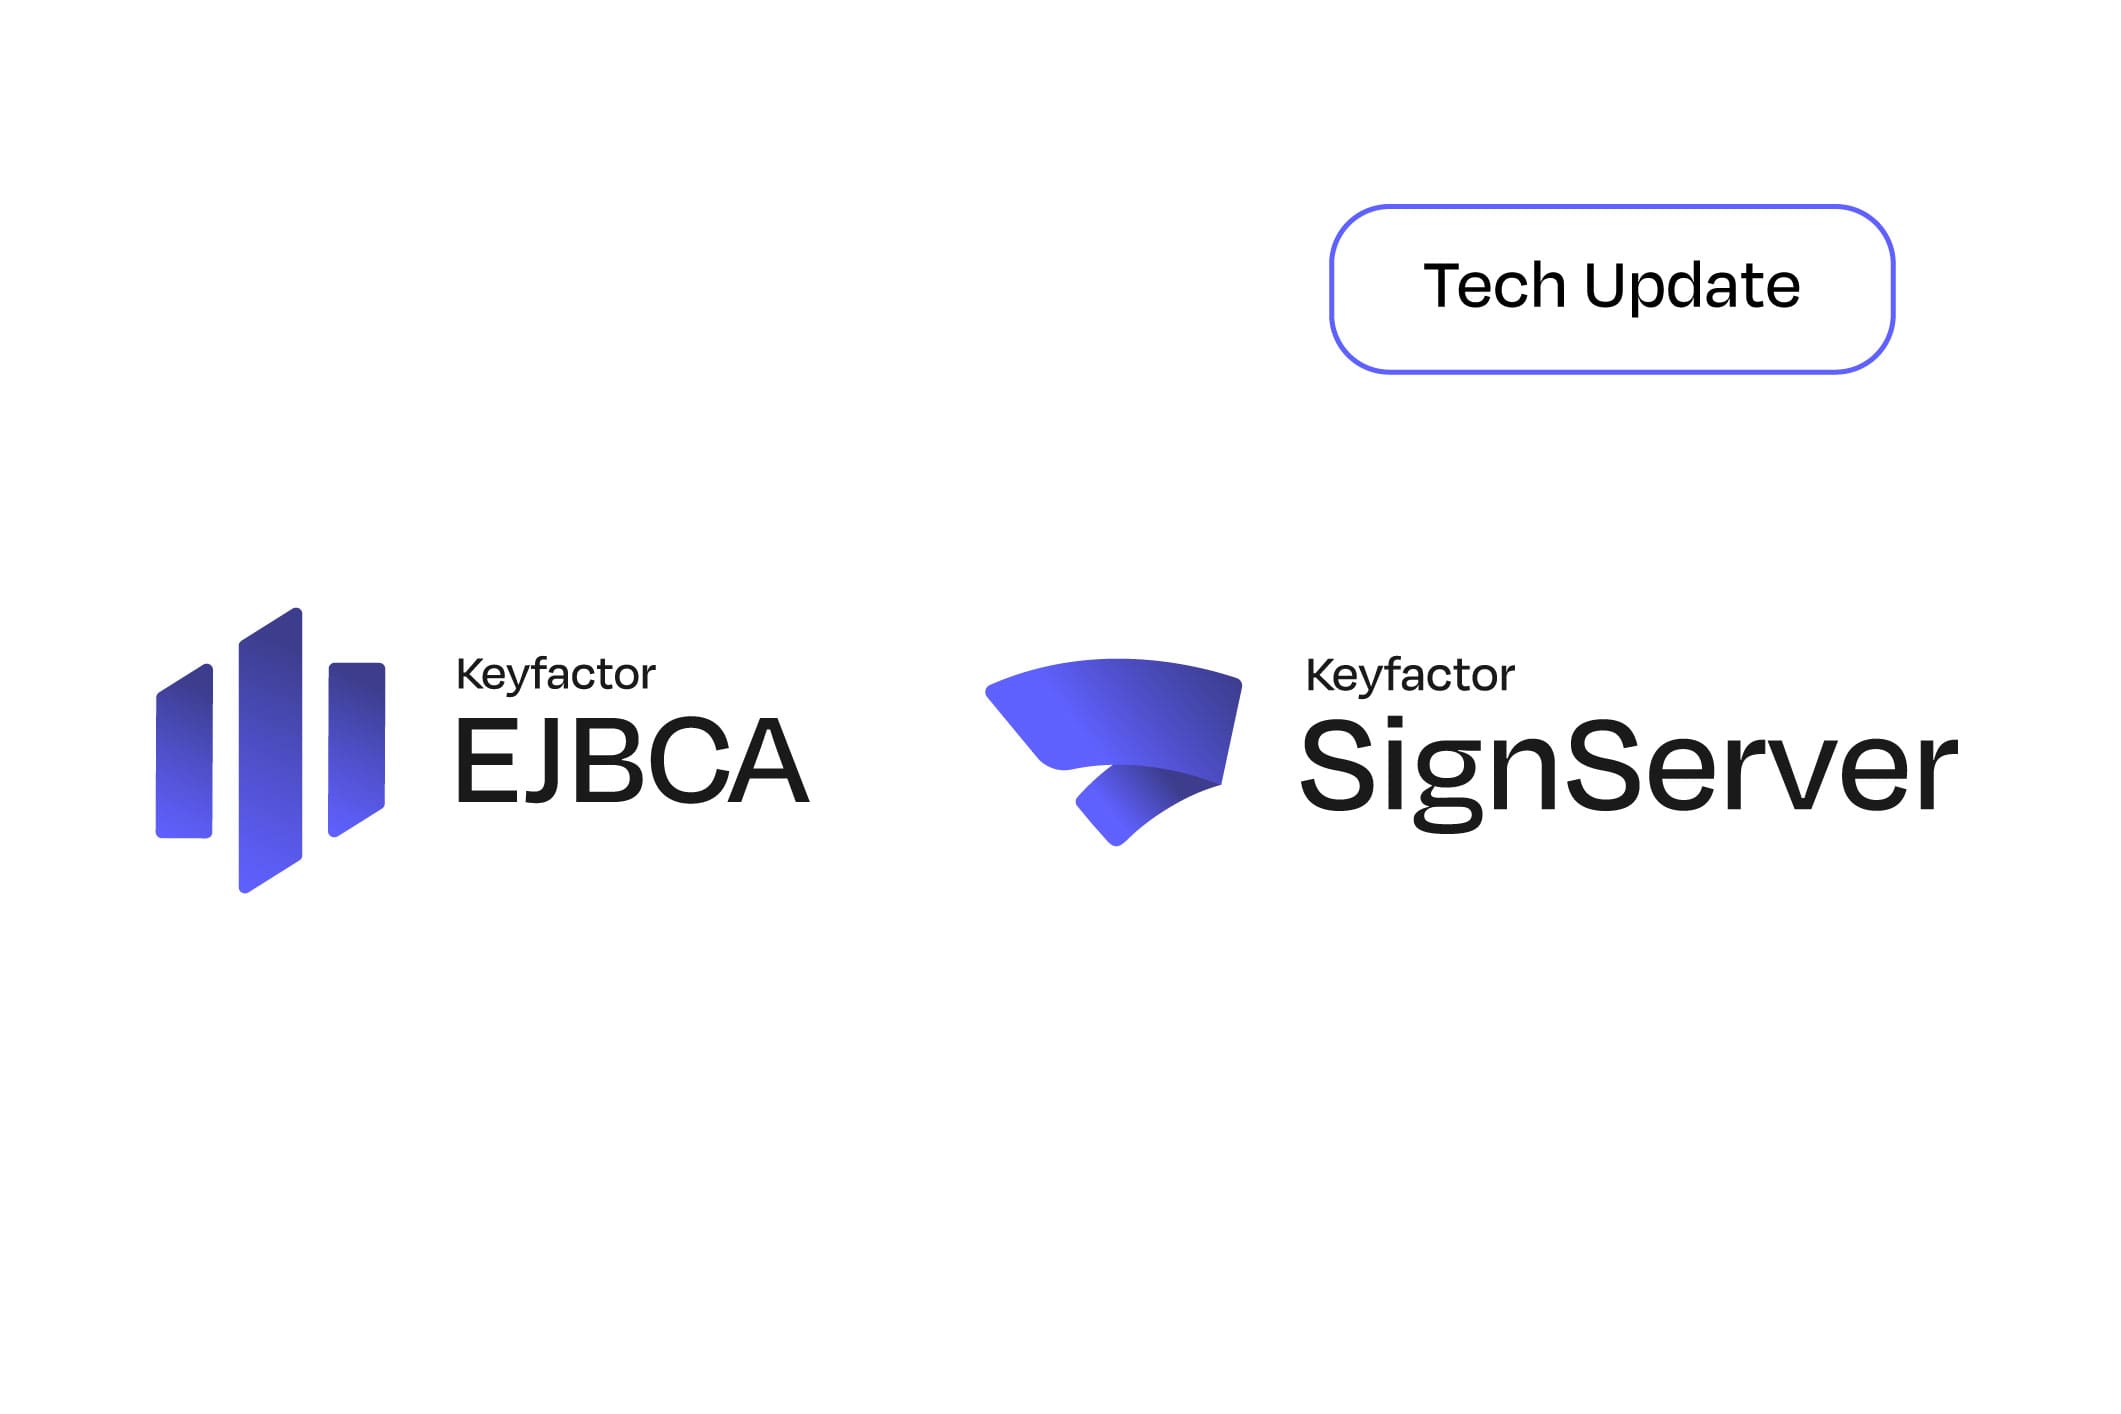 Get Ready for Post Quantum with New EJBCA and SignServer Capabilities